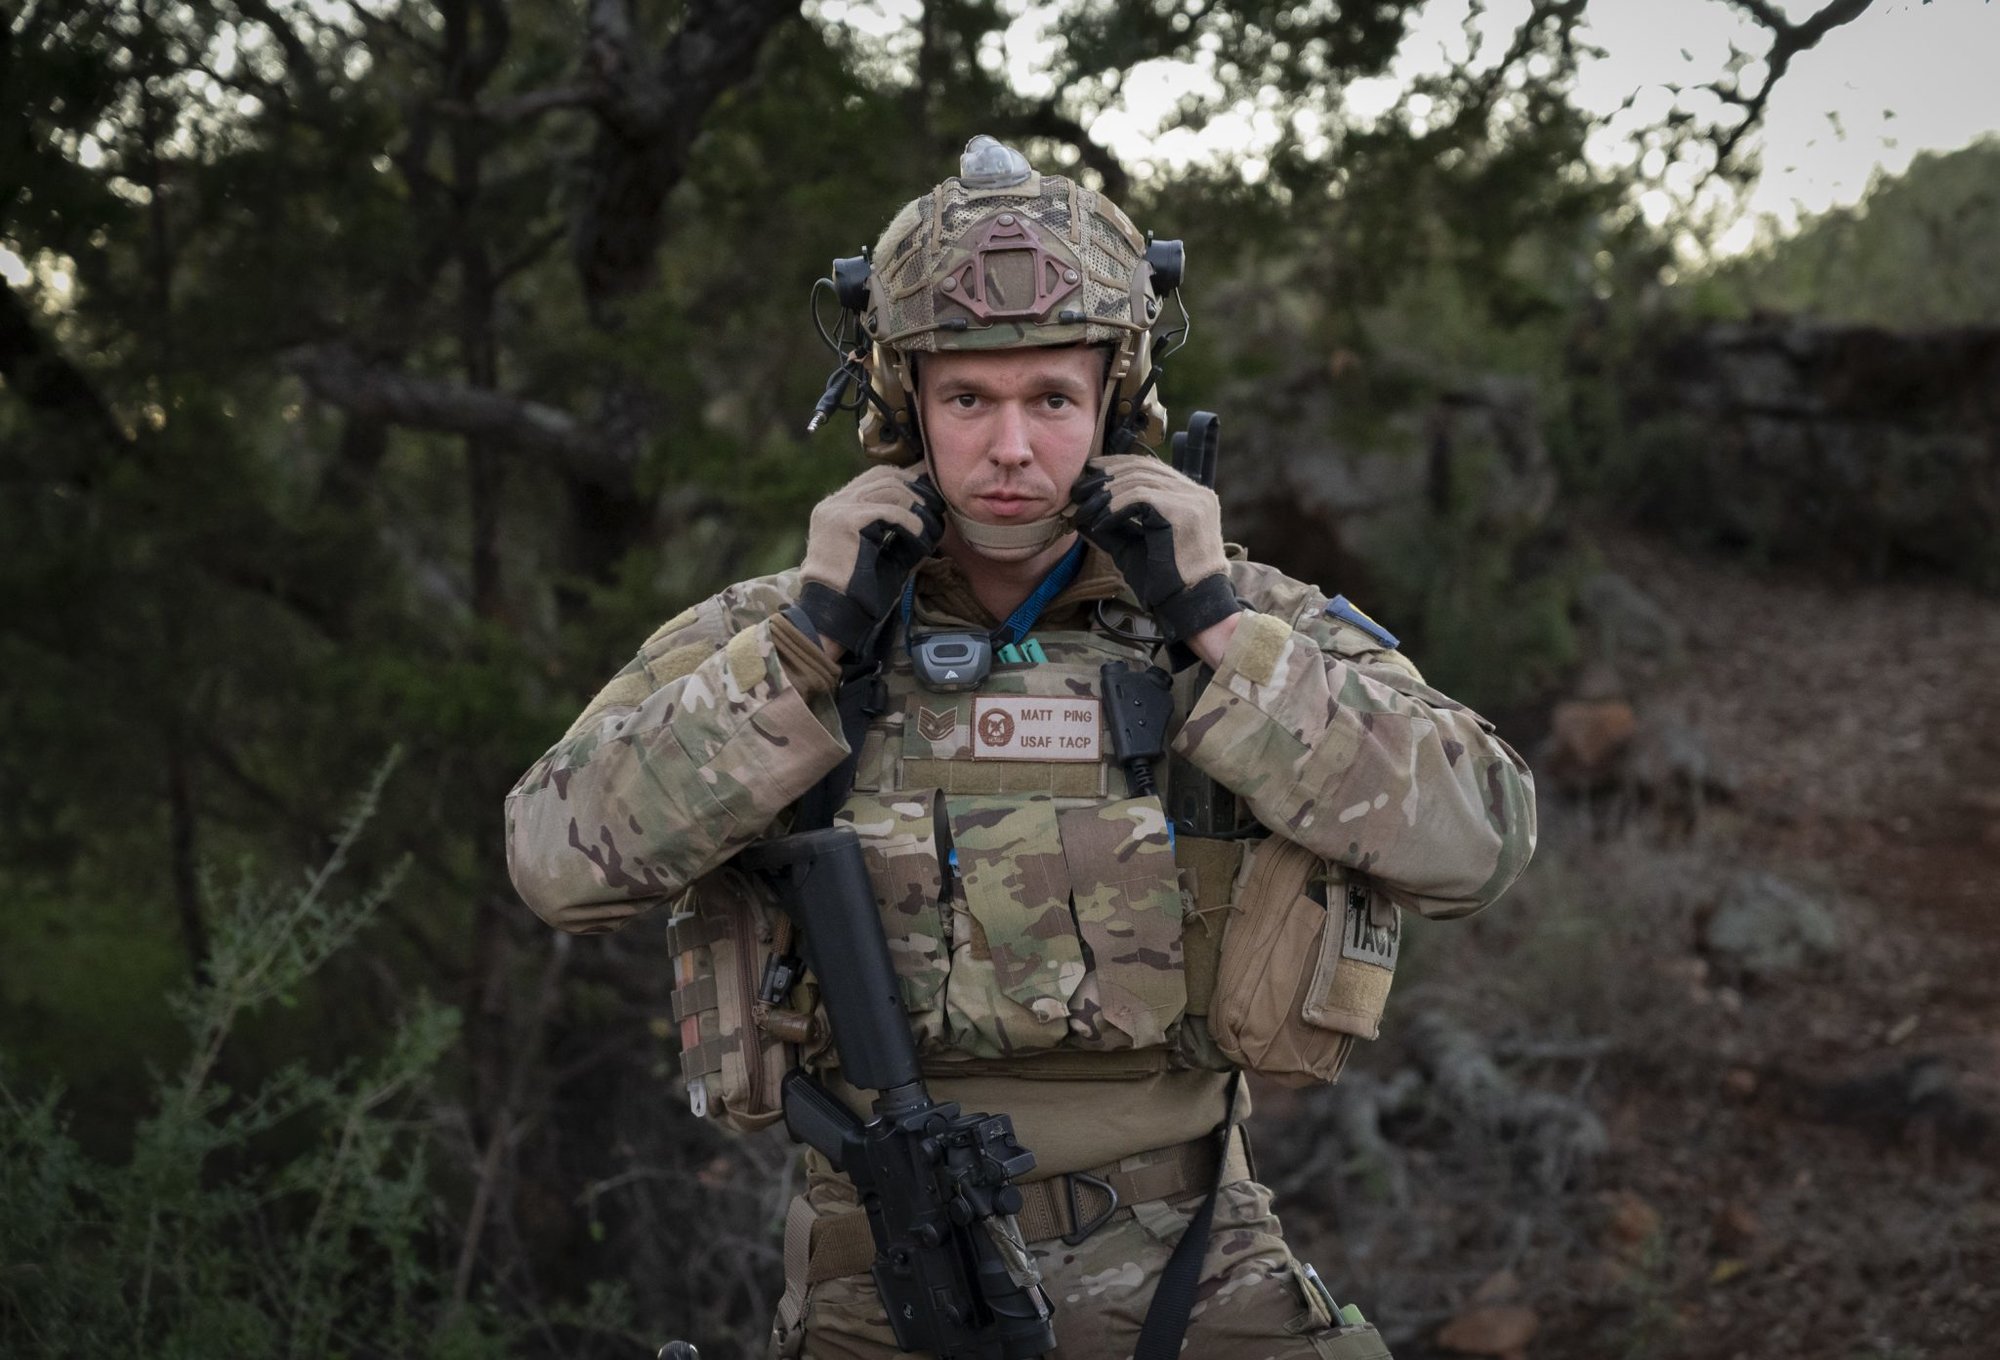 A TACP specialist prepares to step off on a land navigation course at Reveille Peak Ranch in Burnet, Texas, during the 2020 Lightning Challenge. Photo by Ethan E. Rocke/Coffee or Die Magazine